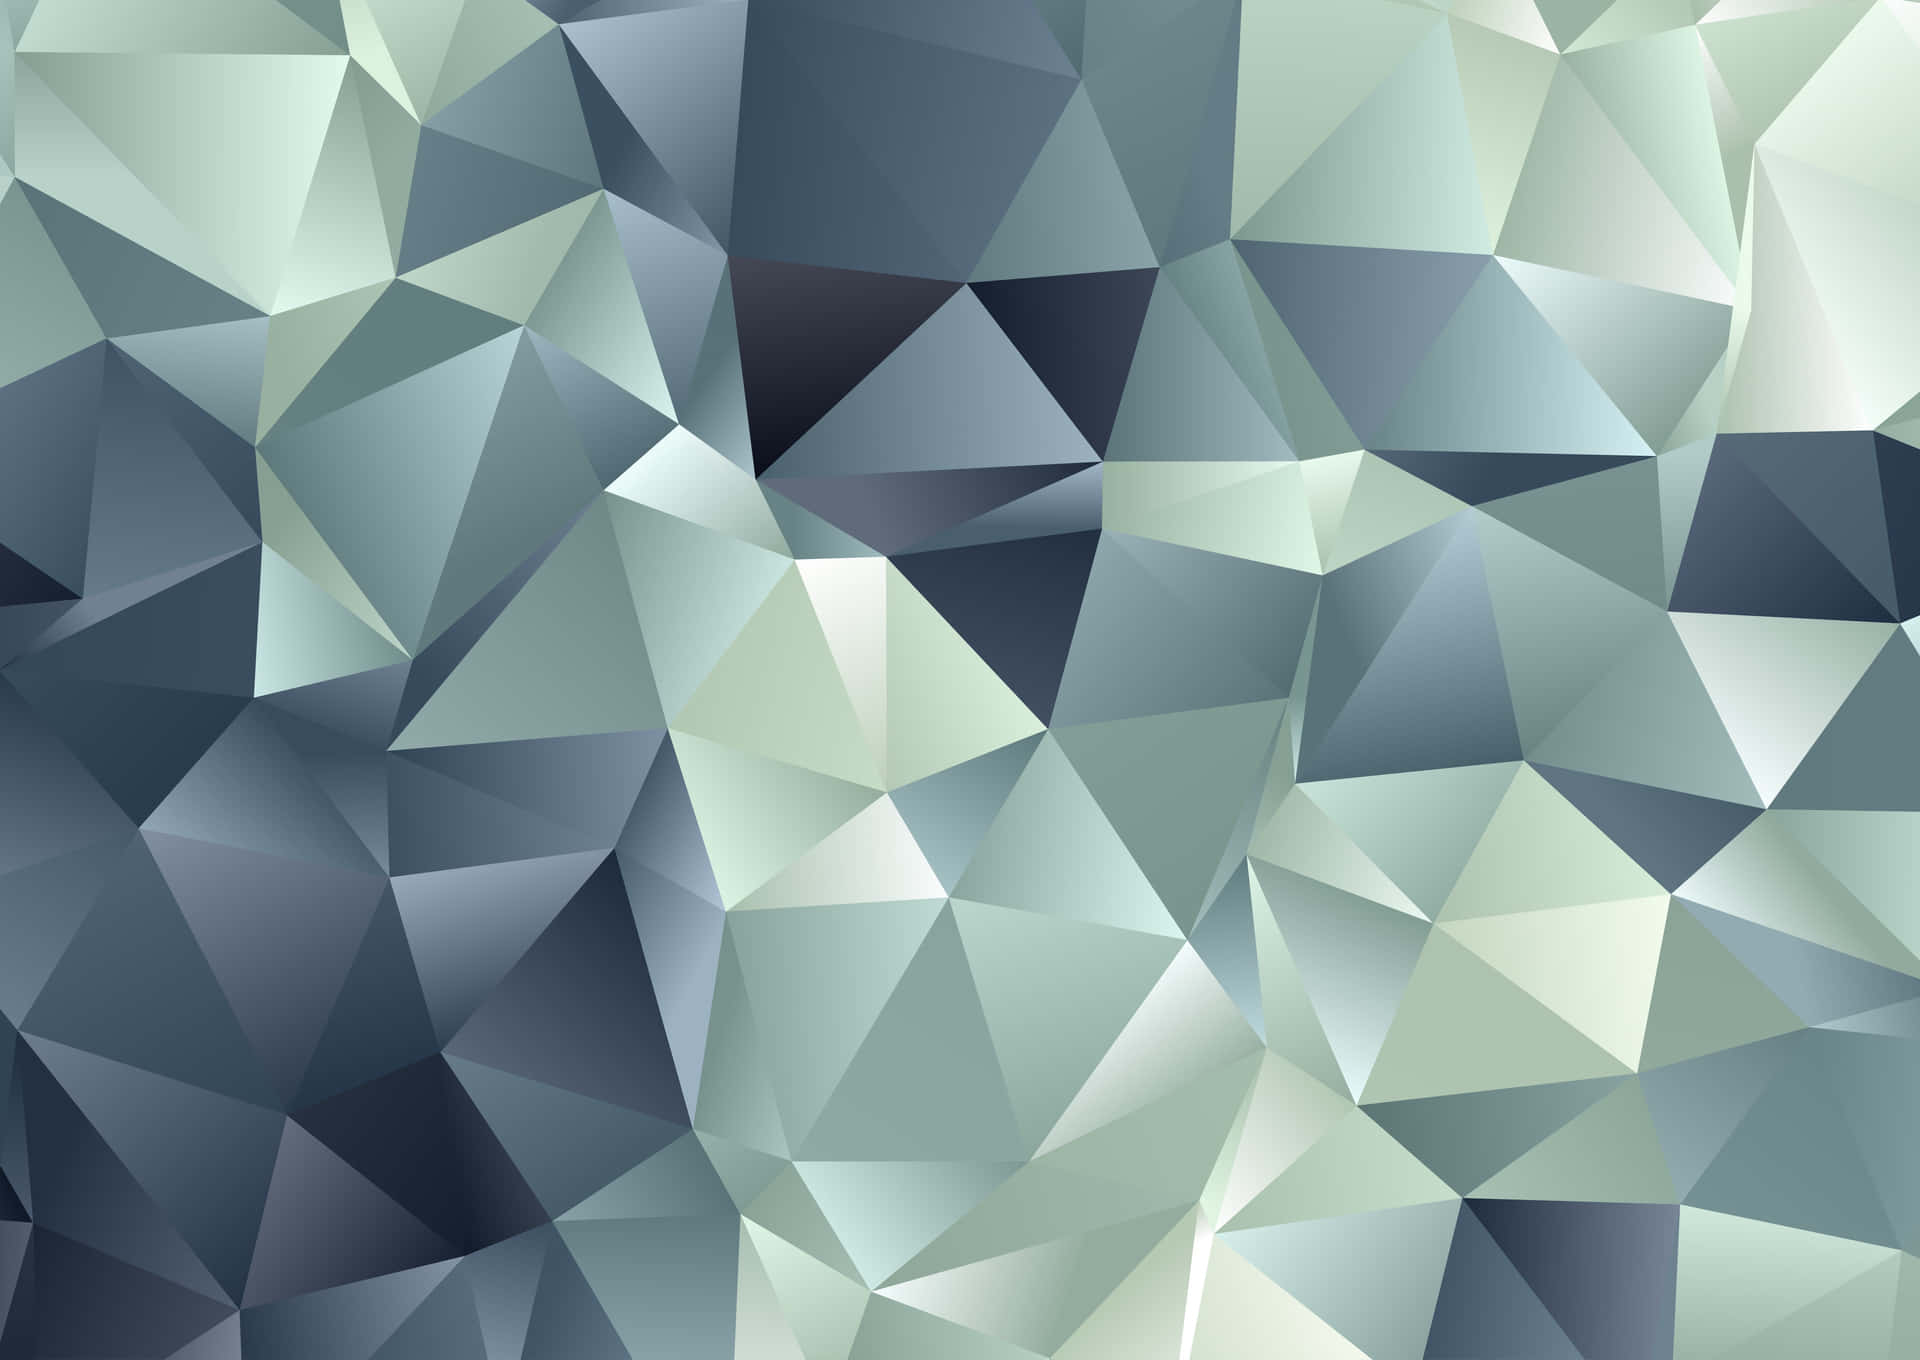 Be transported to a geometric world with this low poly background